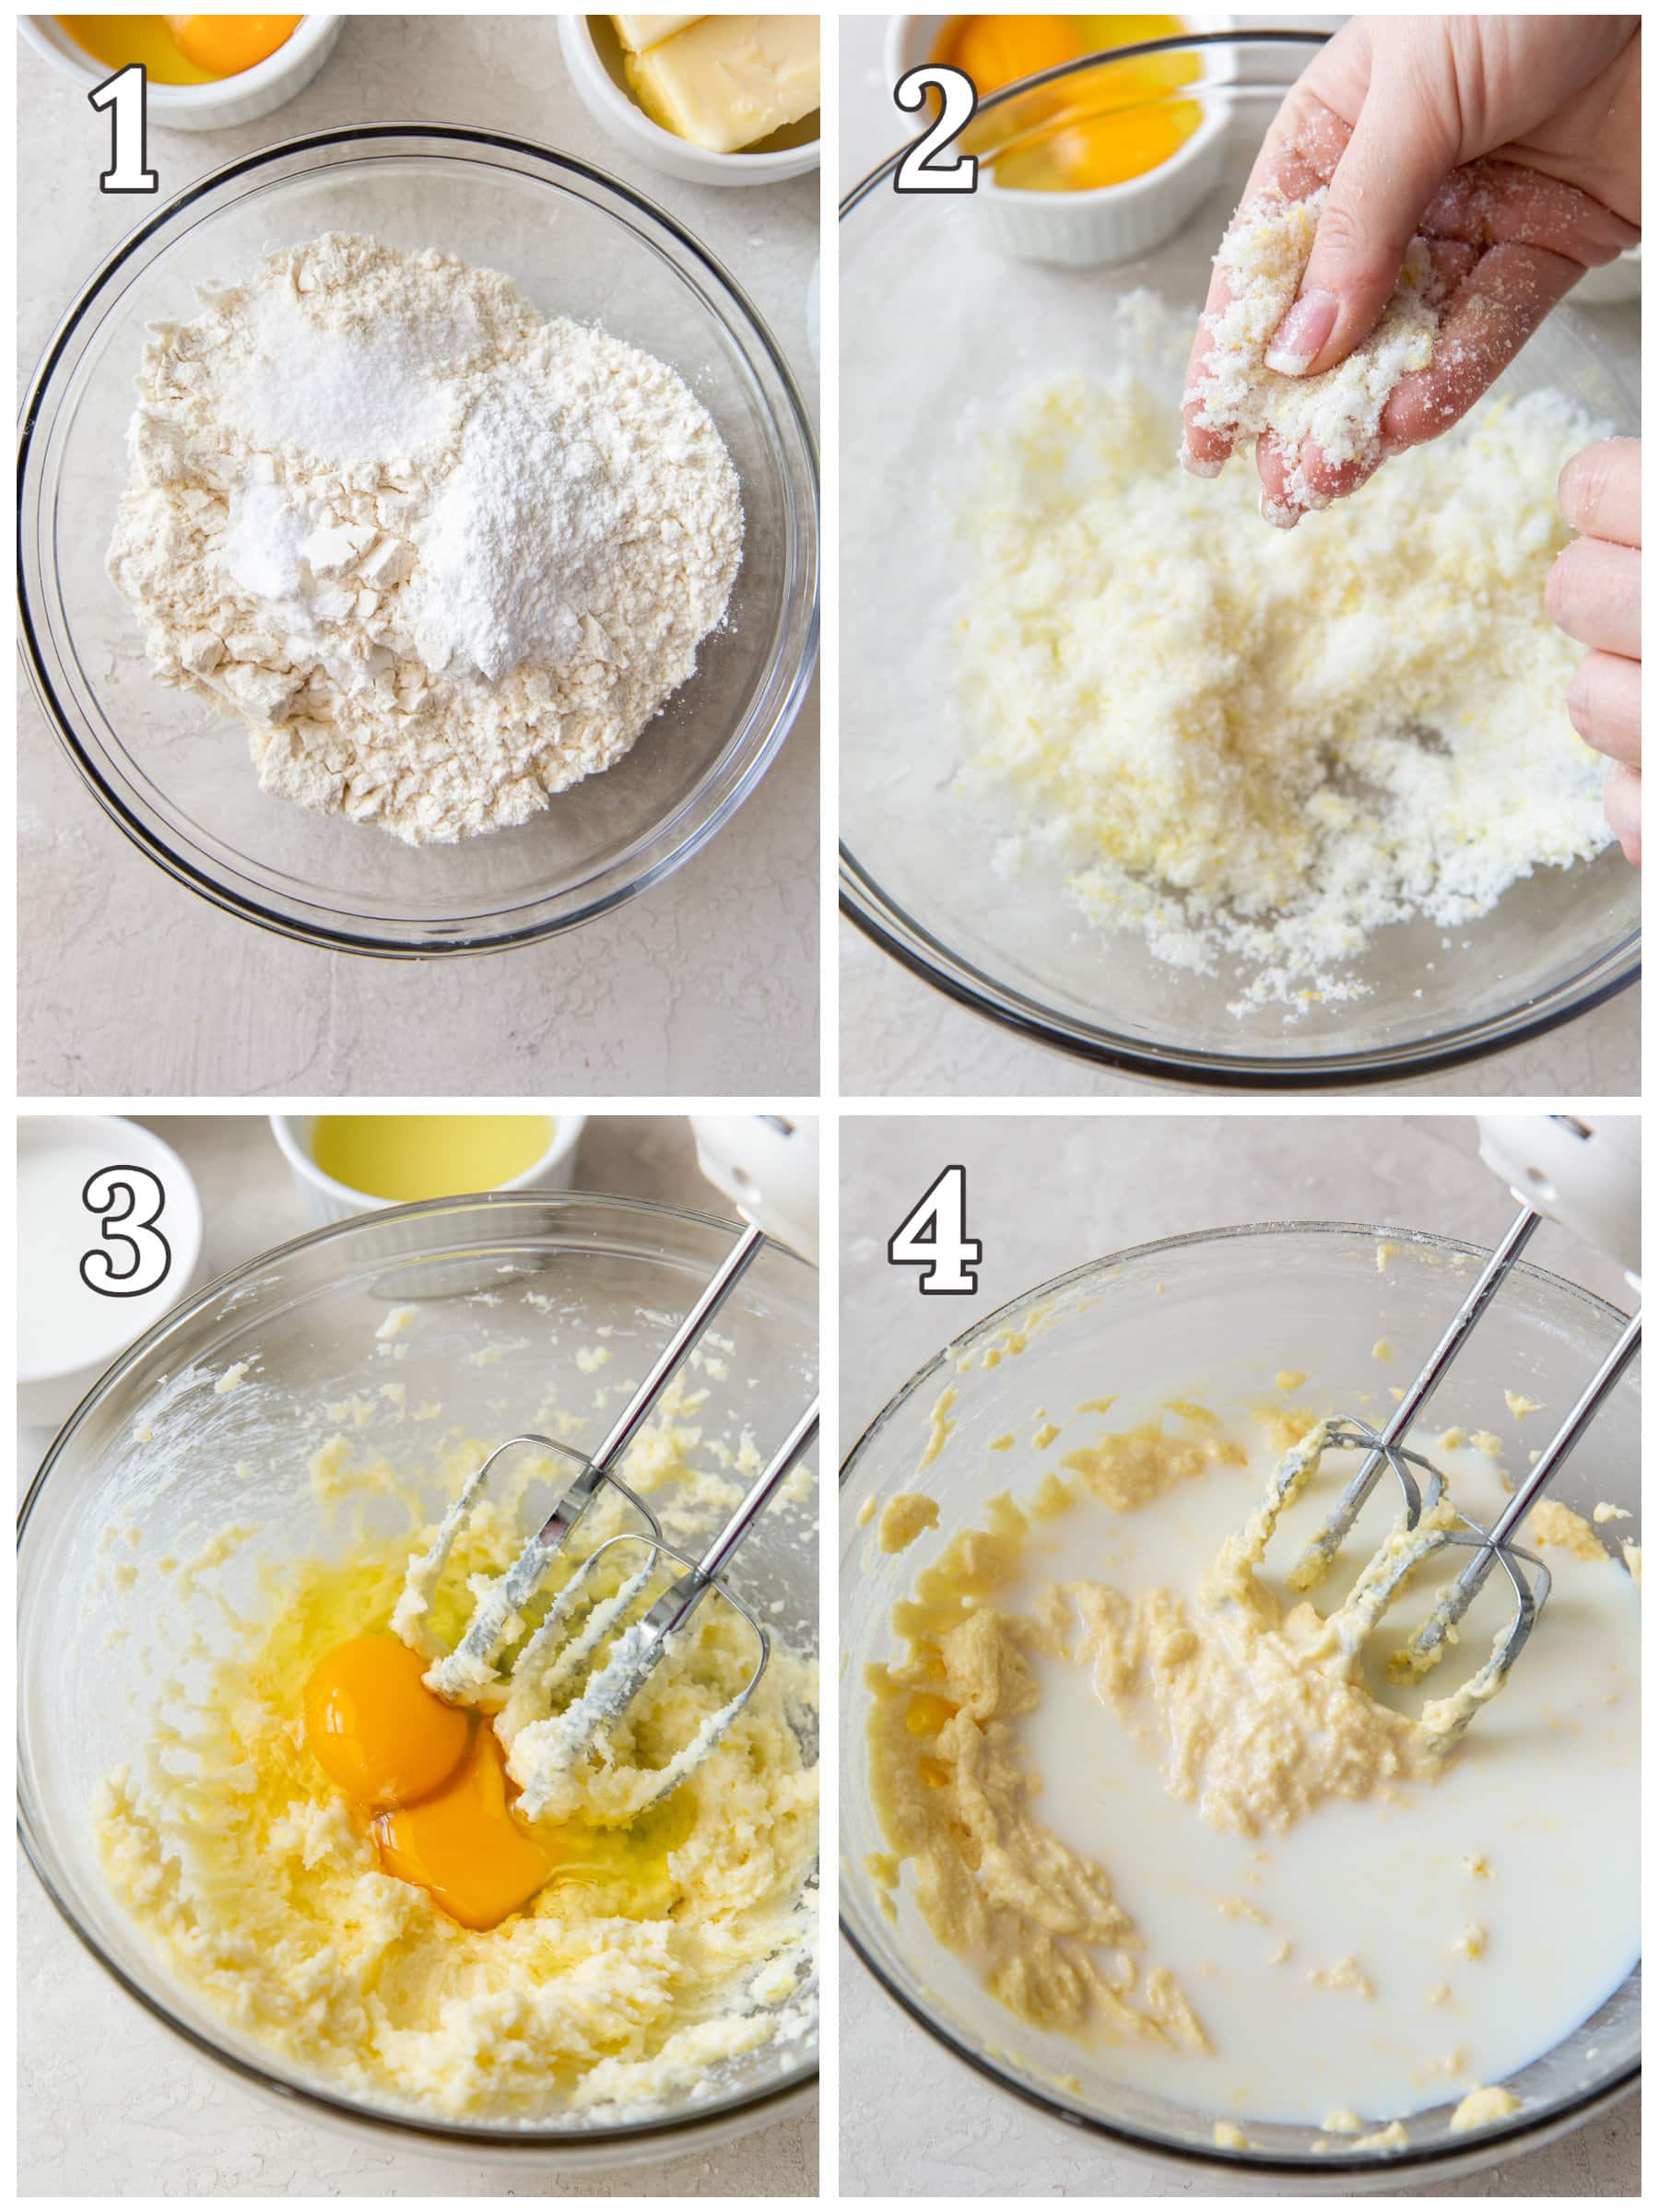 photo collage demonstrating how to make lemon cupcakes in a mixing bowl with hand mixer.